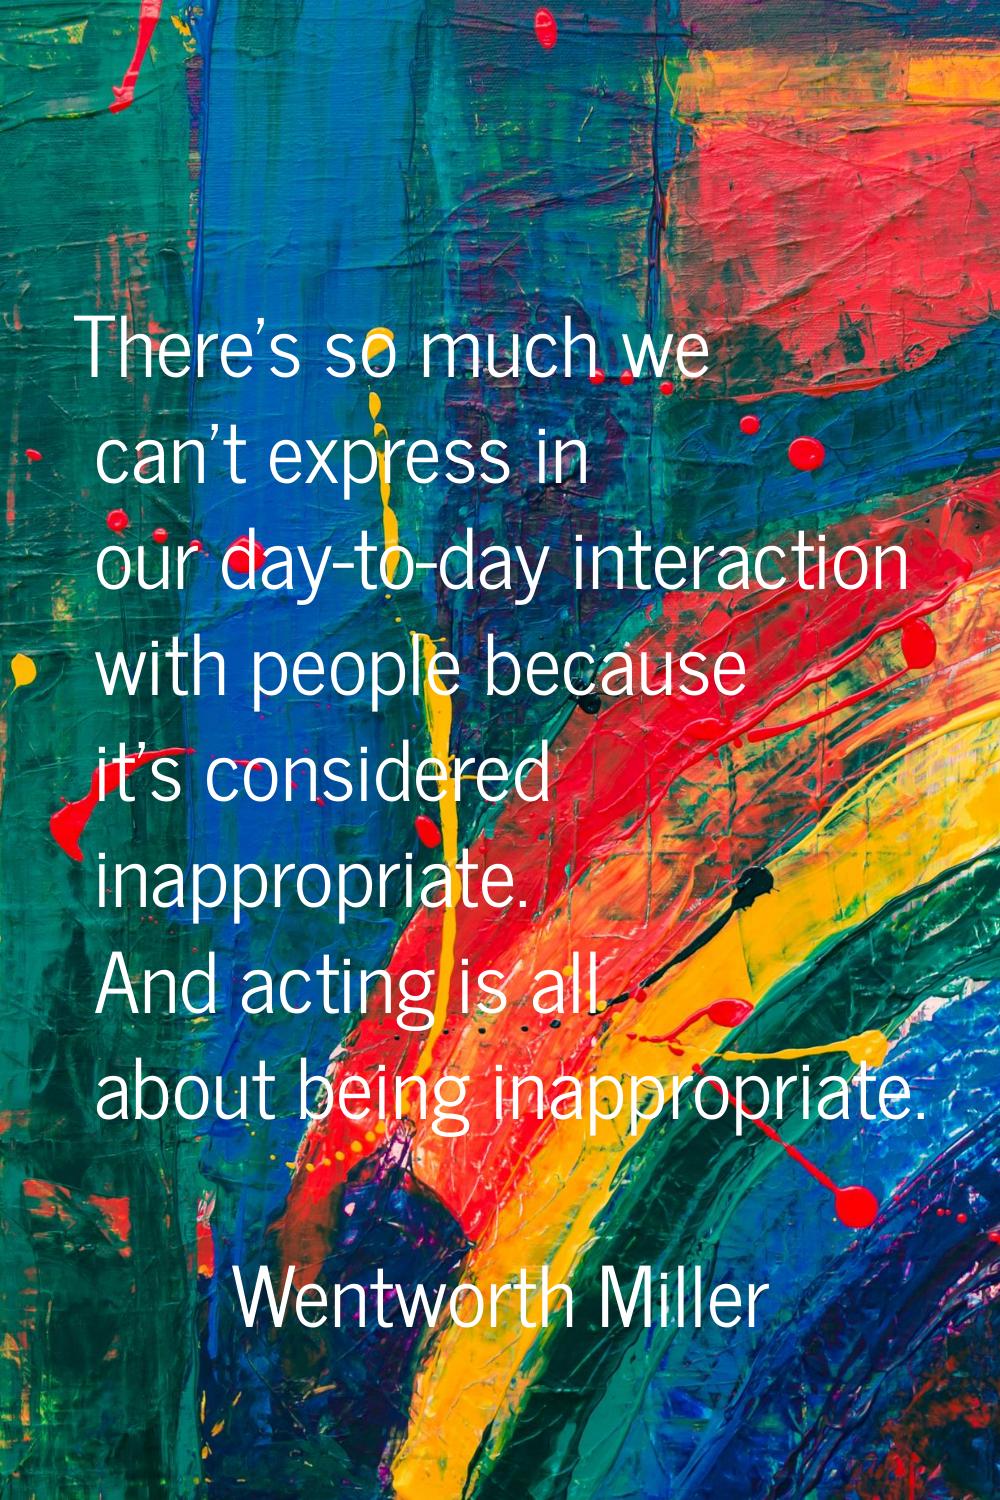 There's so much we can't express in our day-to-day interaction with people because it's considered 